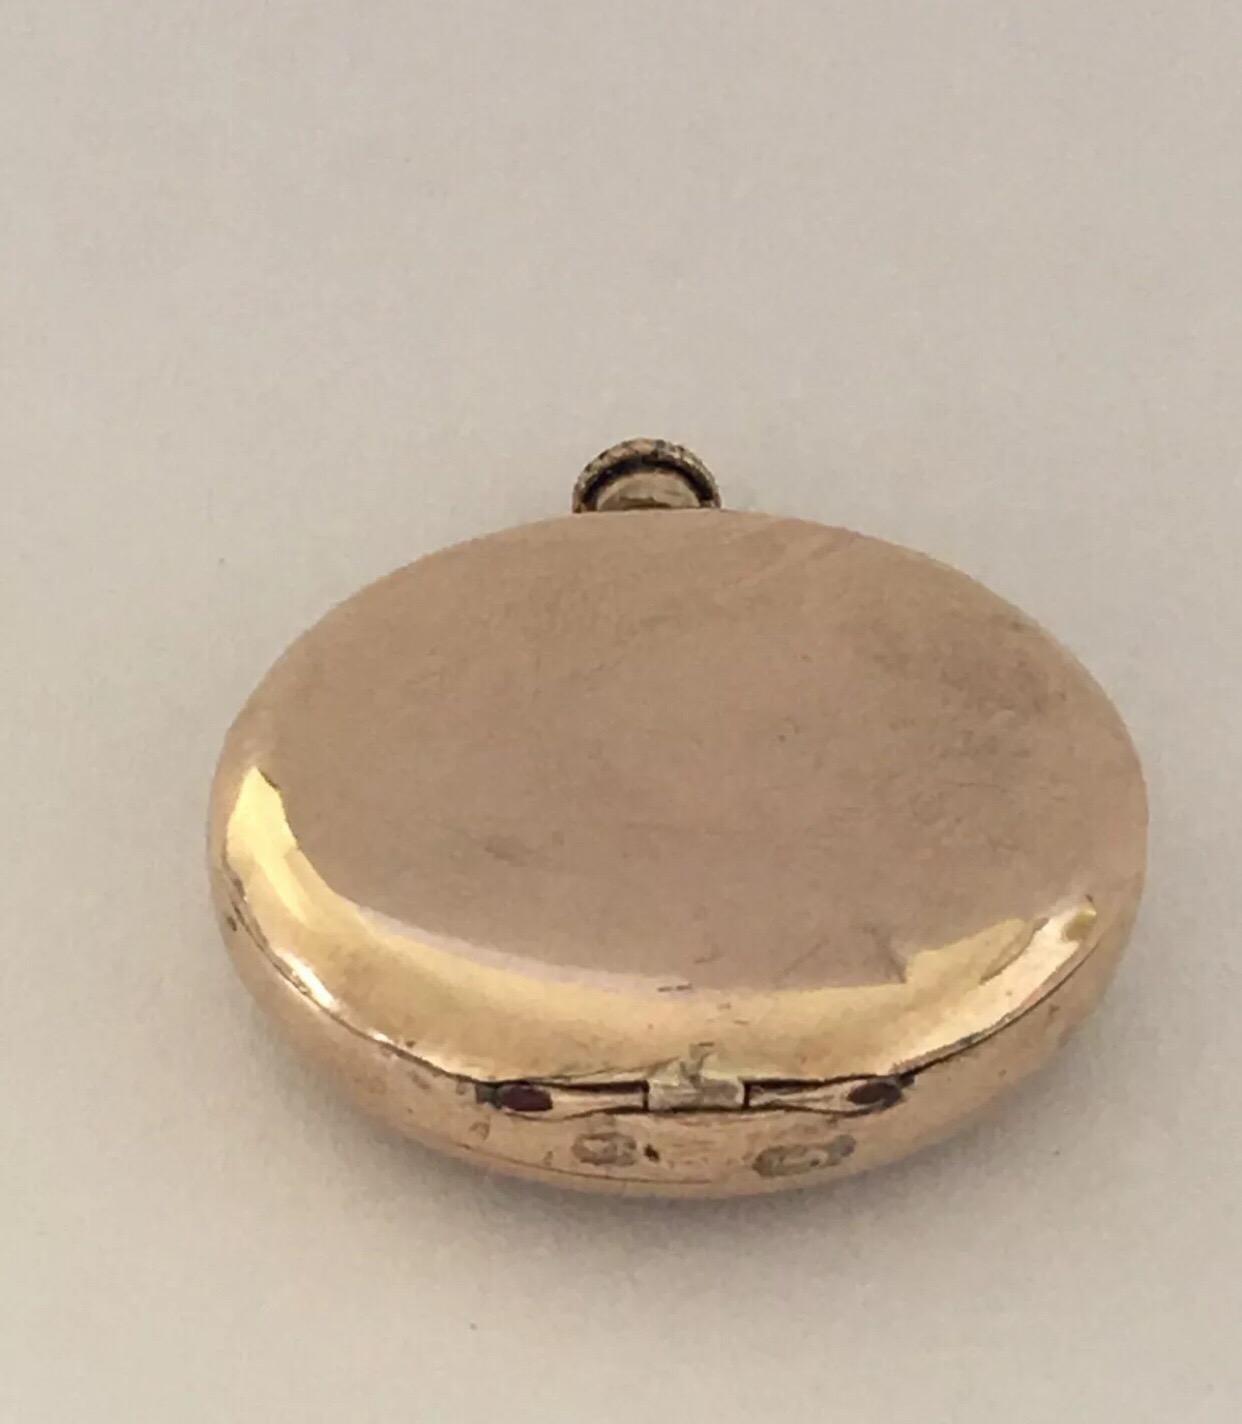 Small Antique Gold-Plated Hamilton Pocket / Fob Watch 1